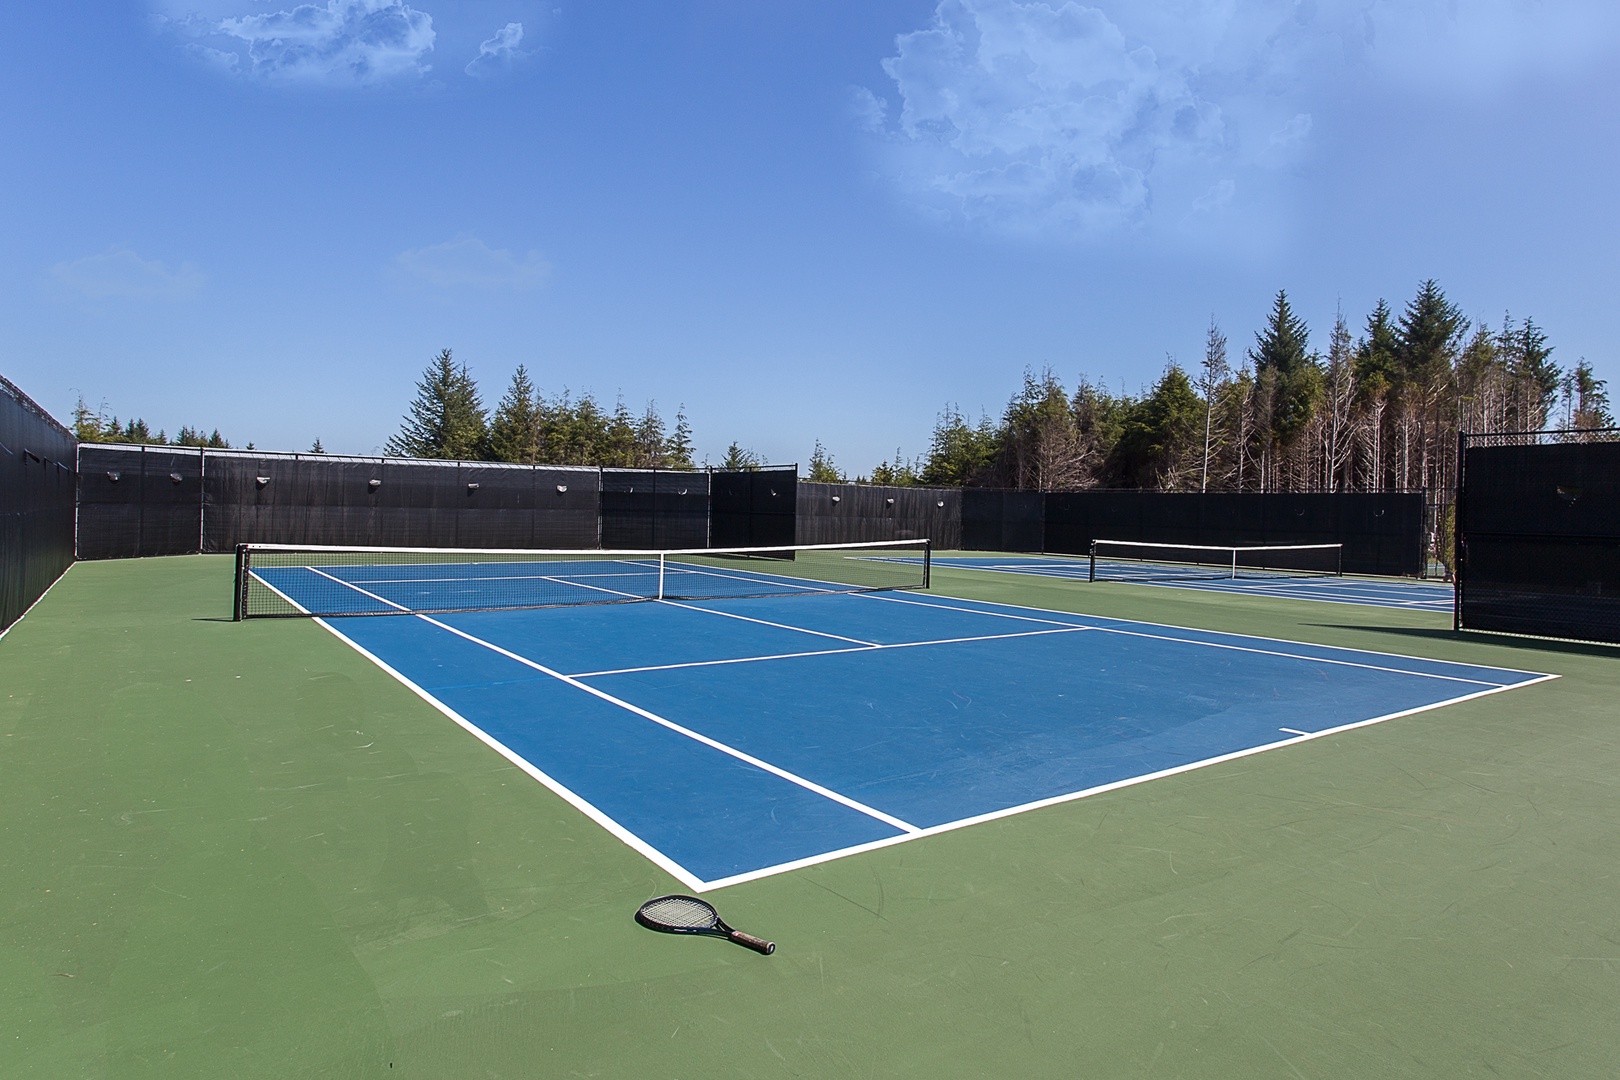 Make sure to pack your tennis racket on your next trip to Seabrook - 2 brand new tennis courts and pickle ball courts await in the Farm District	